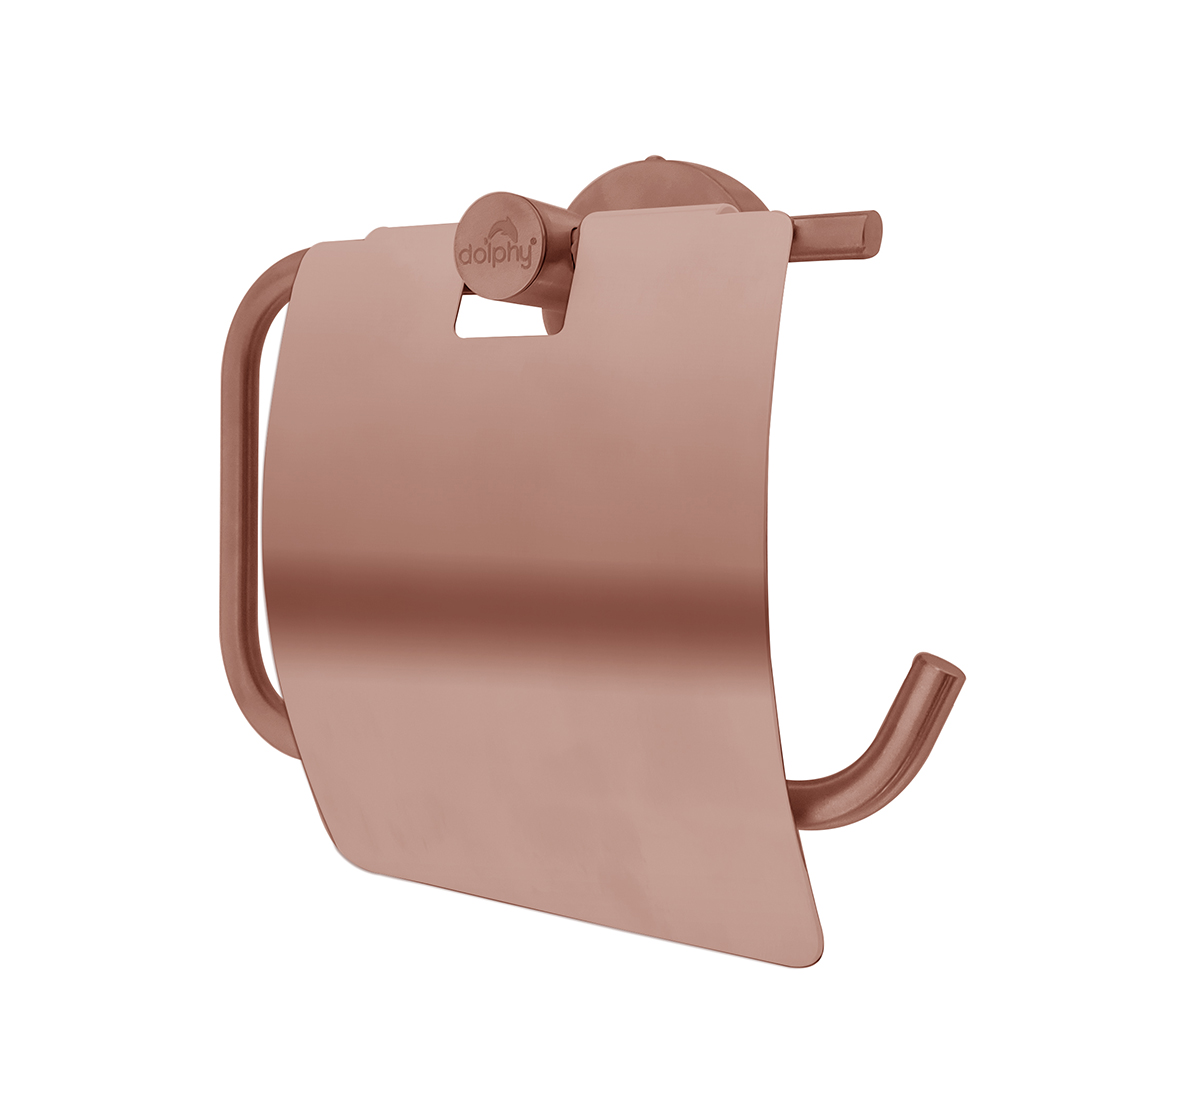 Manual Wall Mounted Rose Gold Toilet Paper Roll Holder
